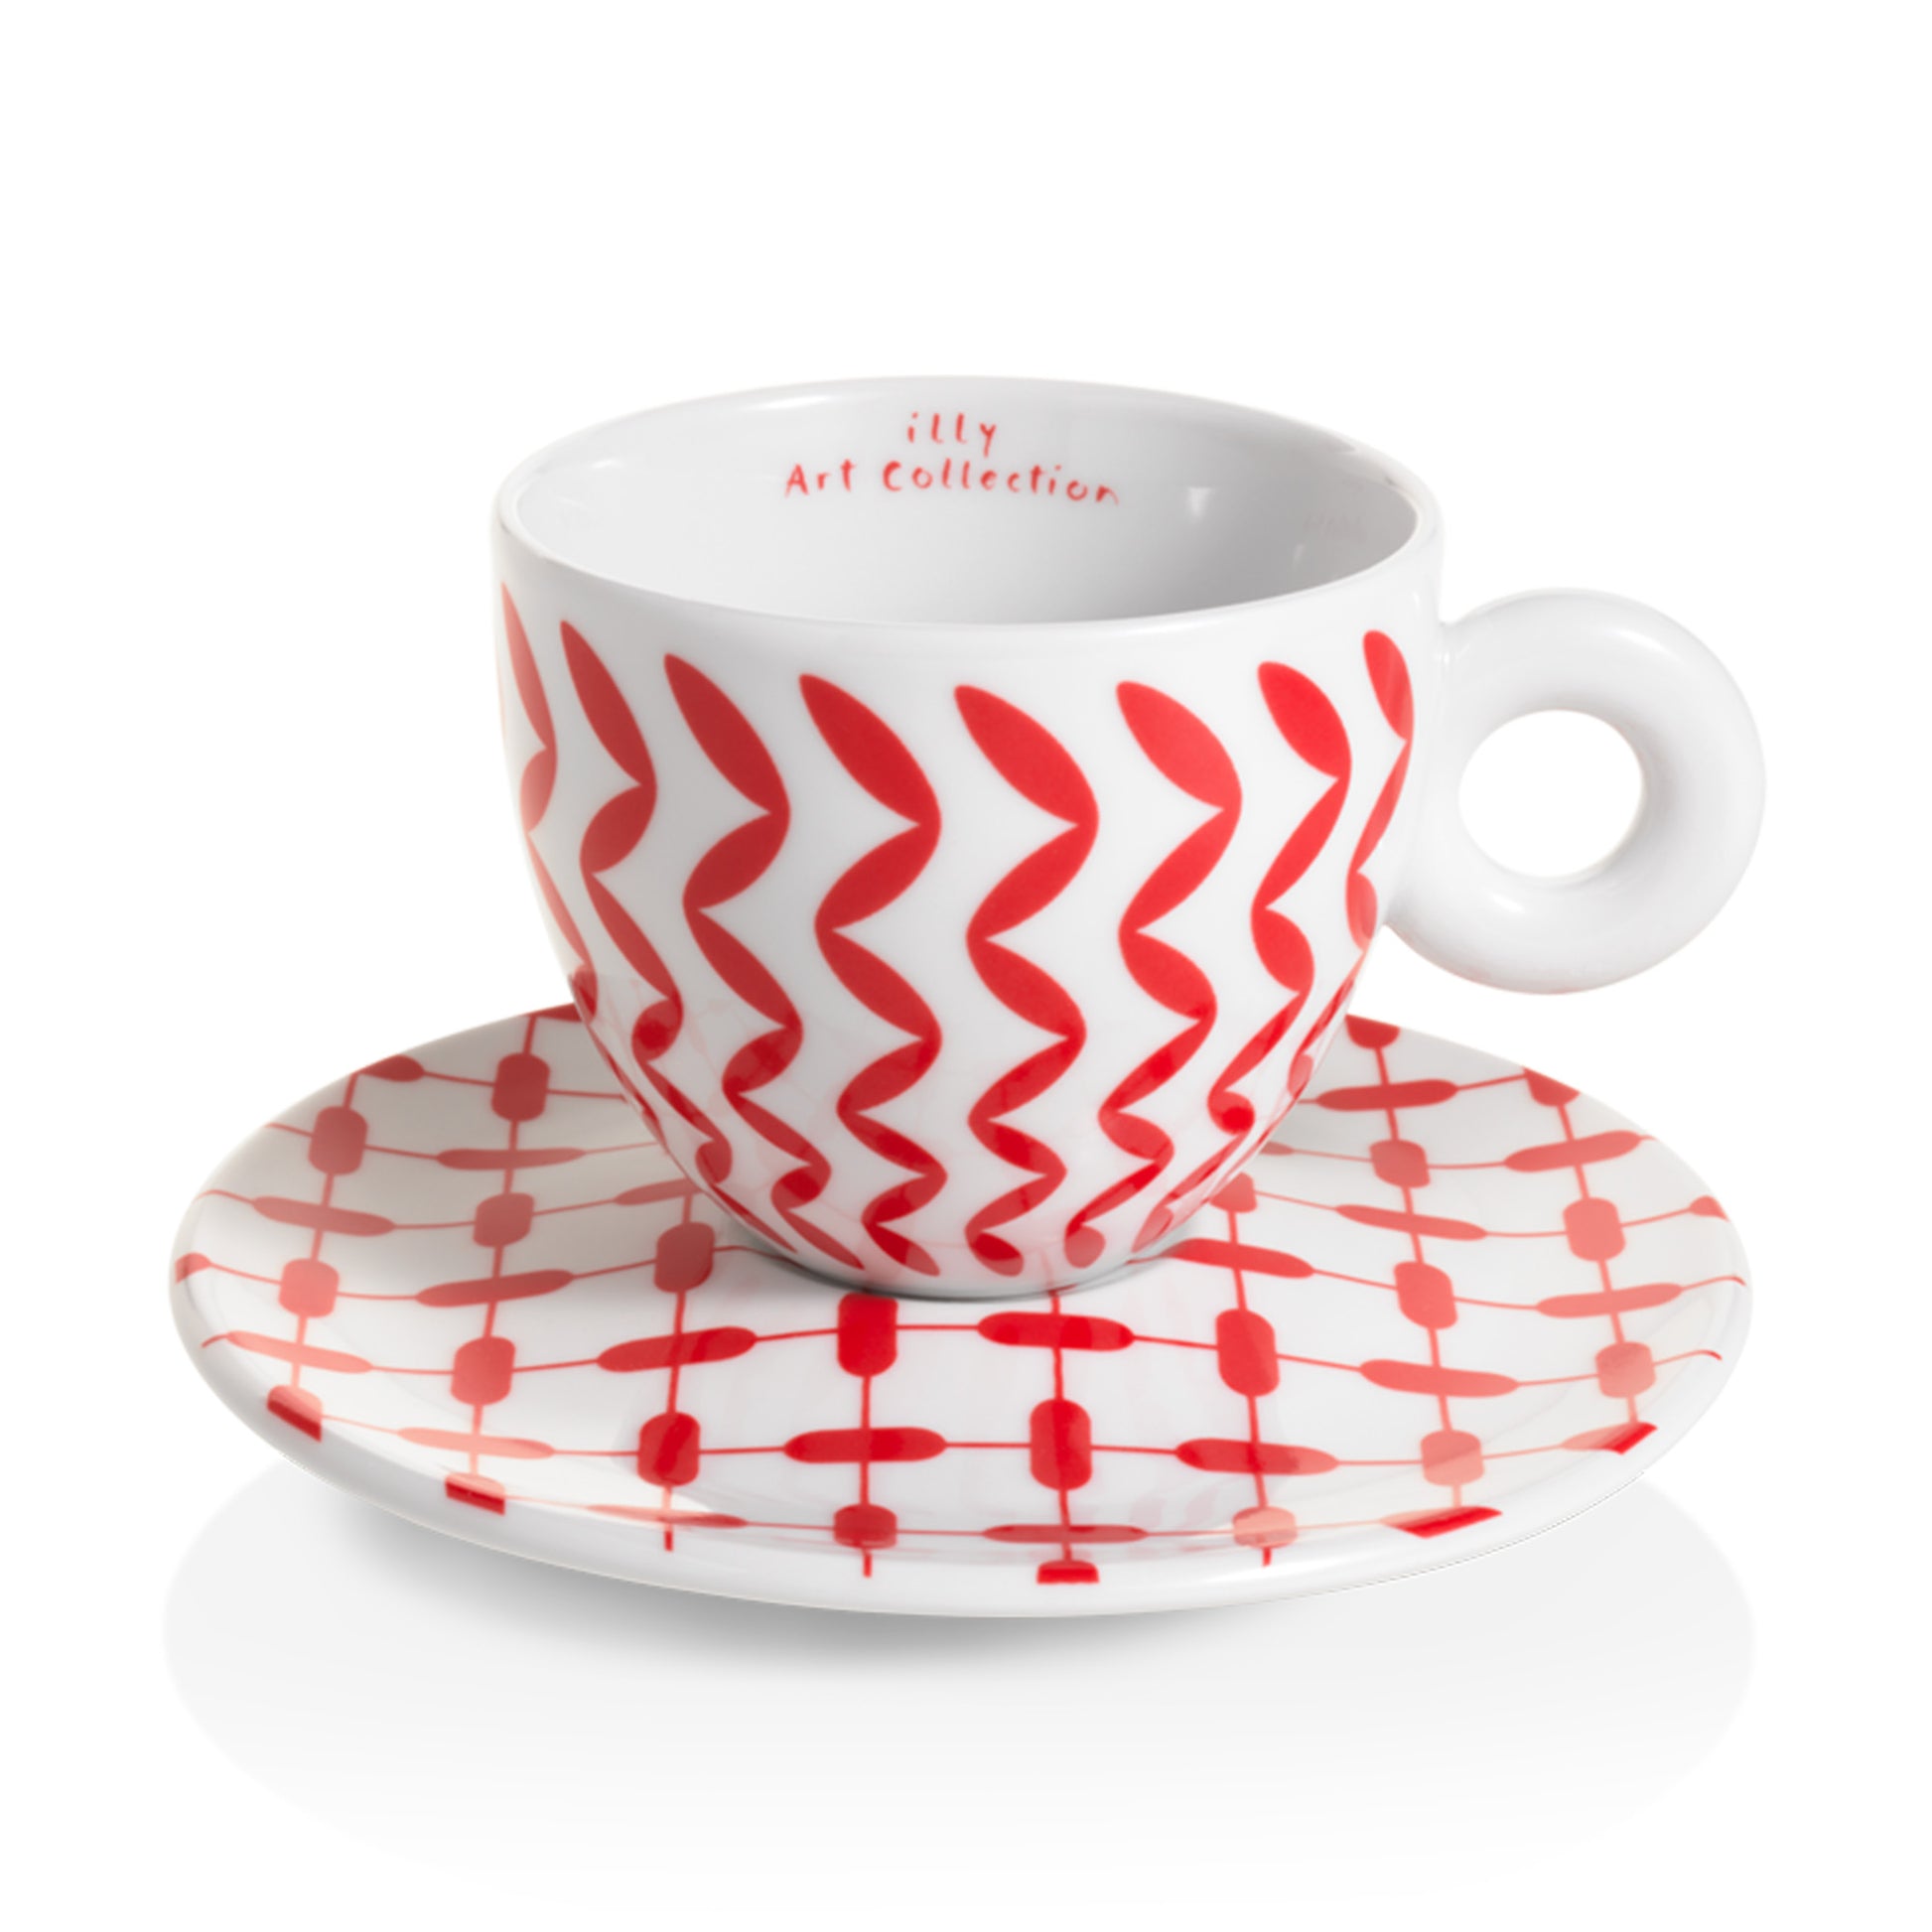 Illy Mona Hatoum Set of 2 Cappuccino Cups and Saucers – Whole Latte Love